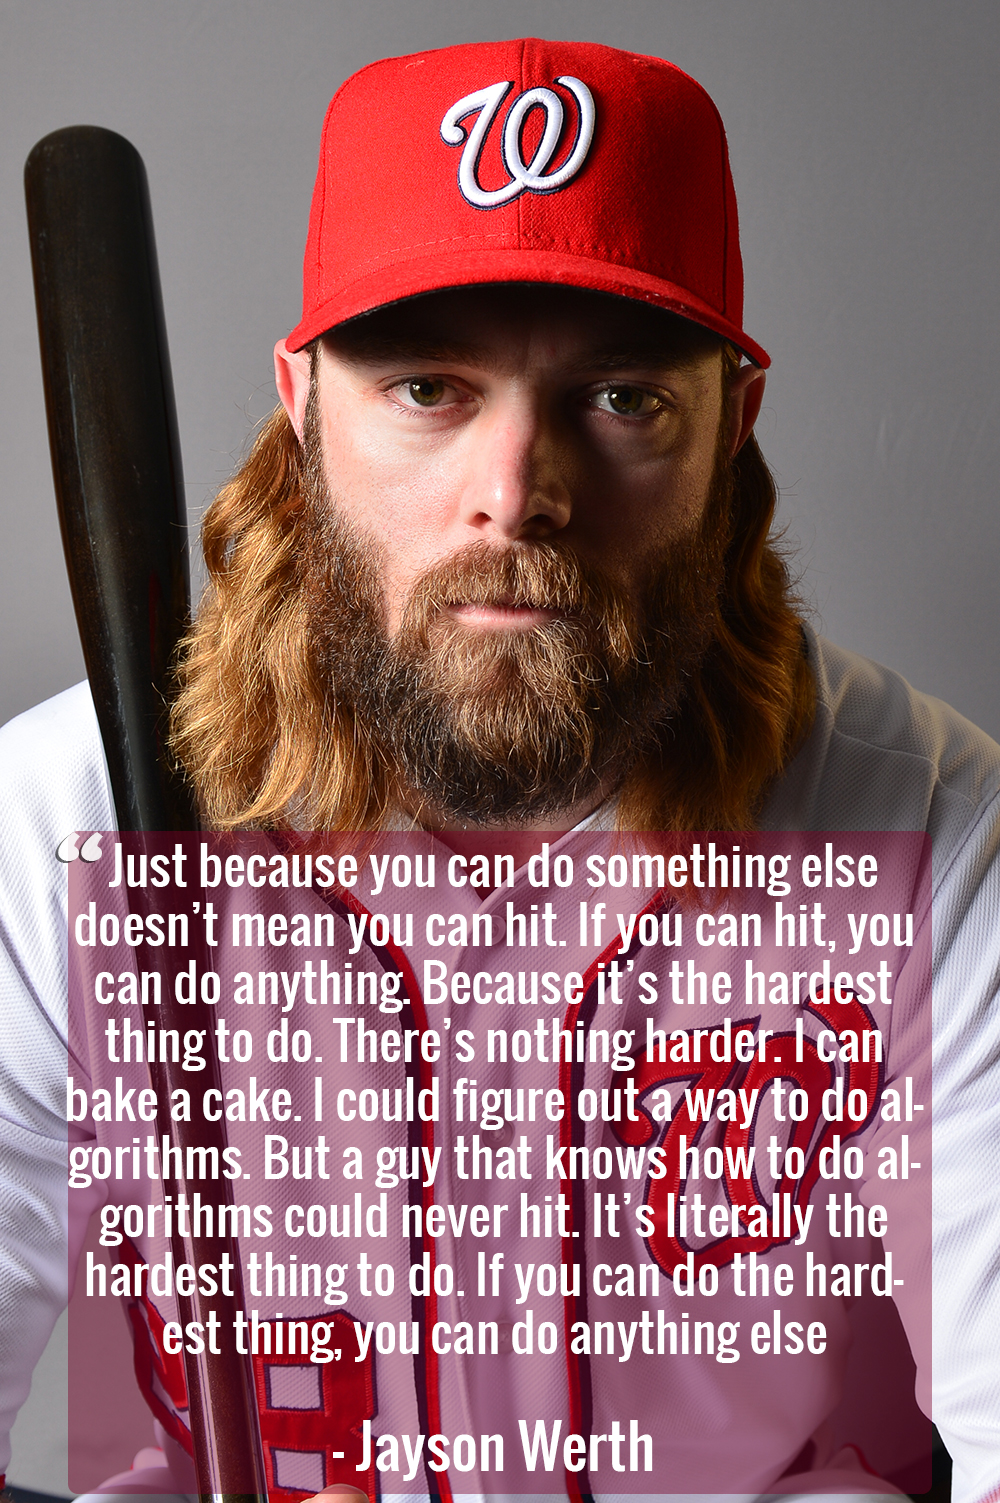 Lost that glovin' feeling: Jayson Werth and his mitt, 'B,' to separate  after 10 years